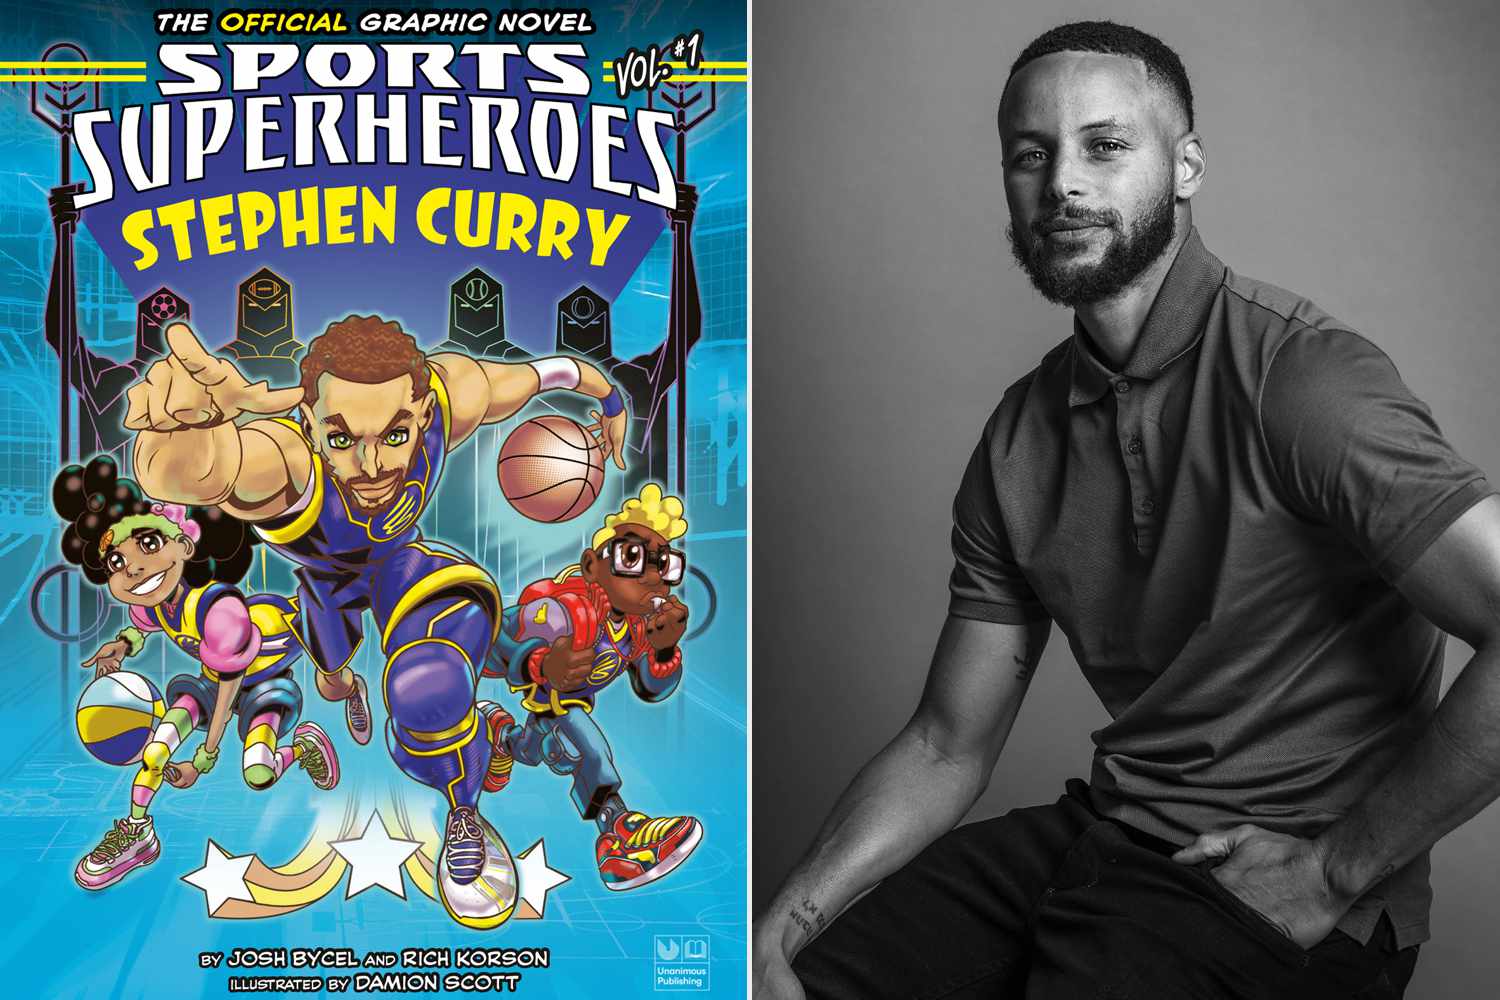 Stephen Curry Reveals Cover of New ‘Sports Superheroes’ Graphic Novel Series [Video]